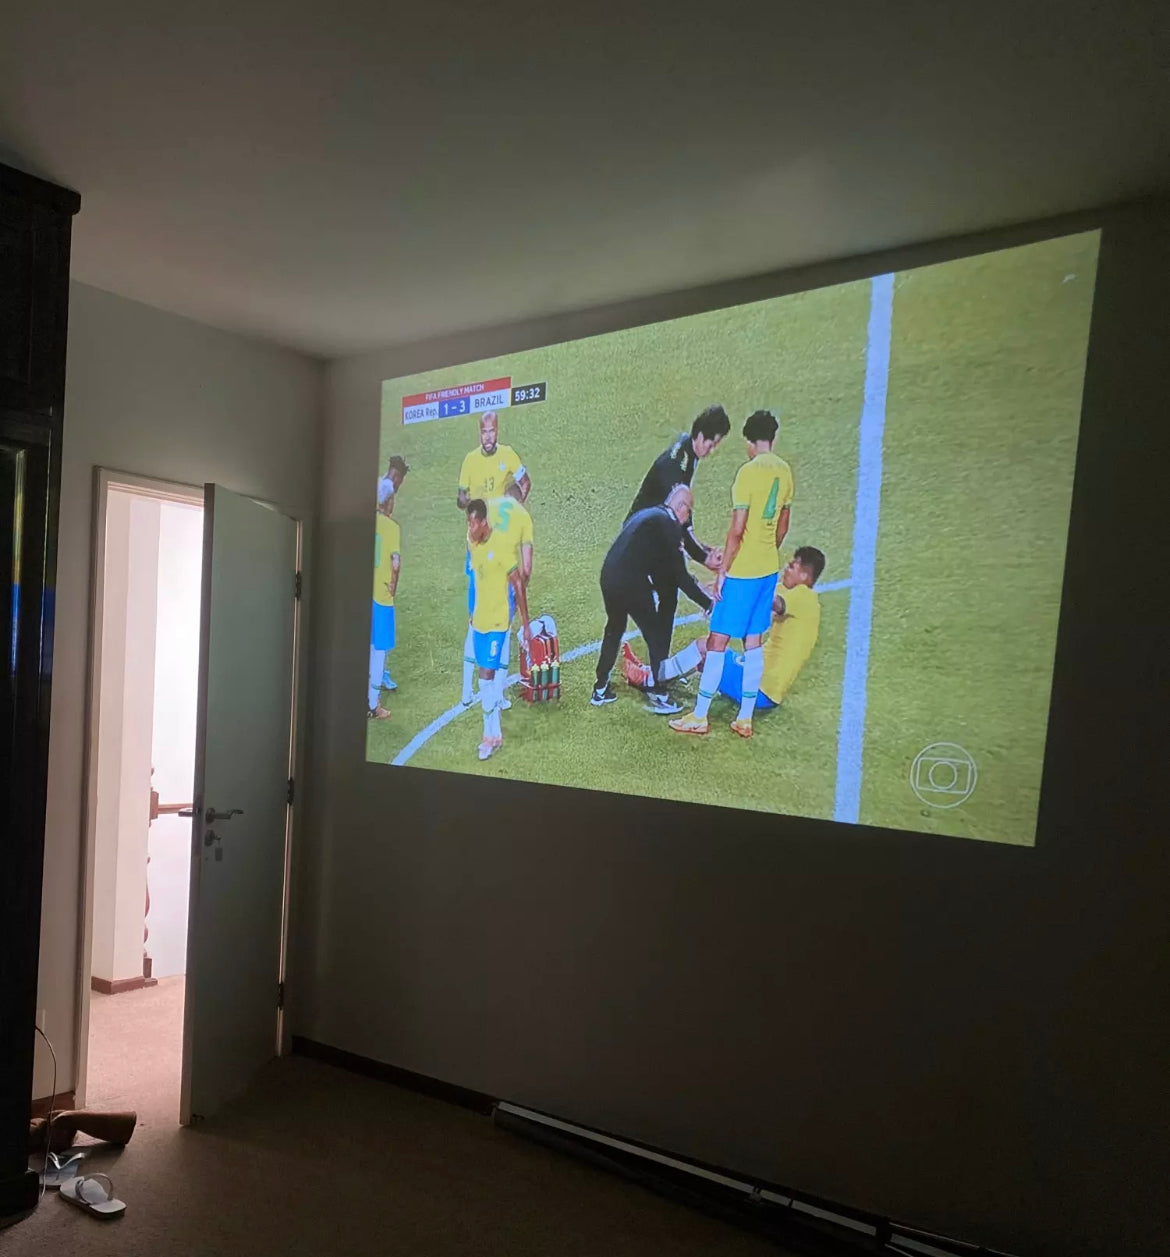 The Yester Year Peak MiniProjector™️